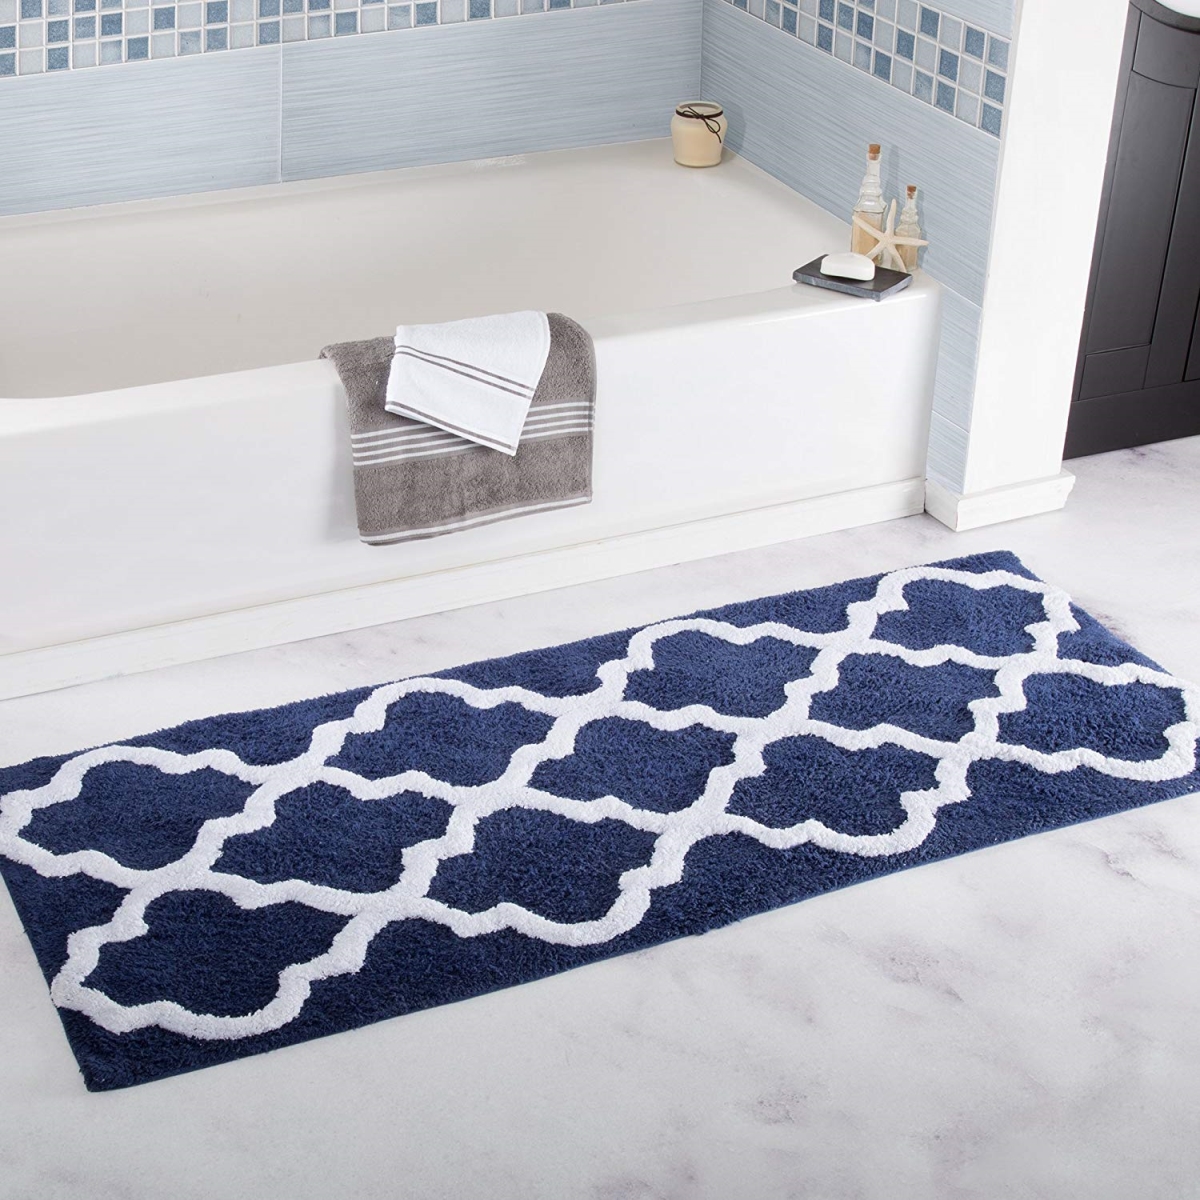 Picture of Bedford Home 67A-78614 100 Percent Cotton Trellis Bathroom Mat - 24 x 60 in. - Navy